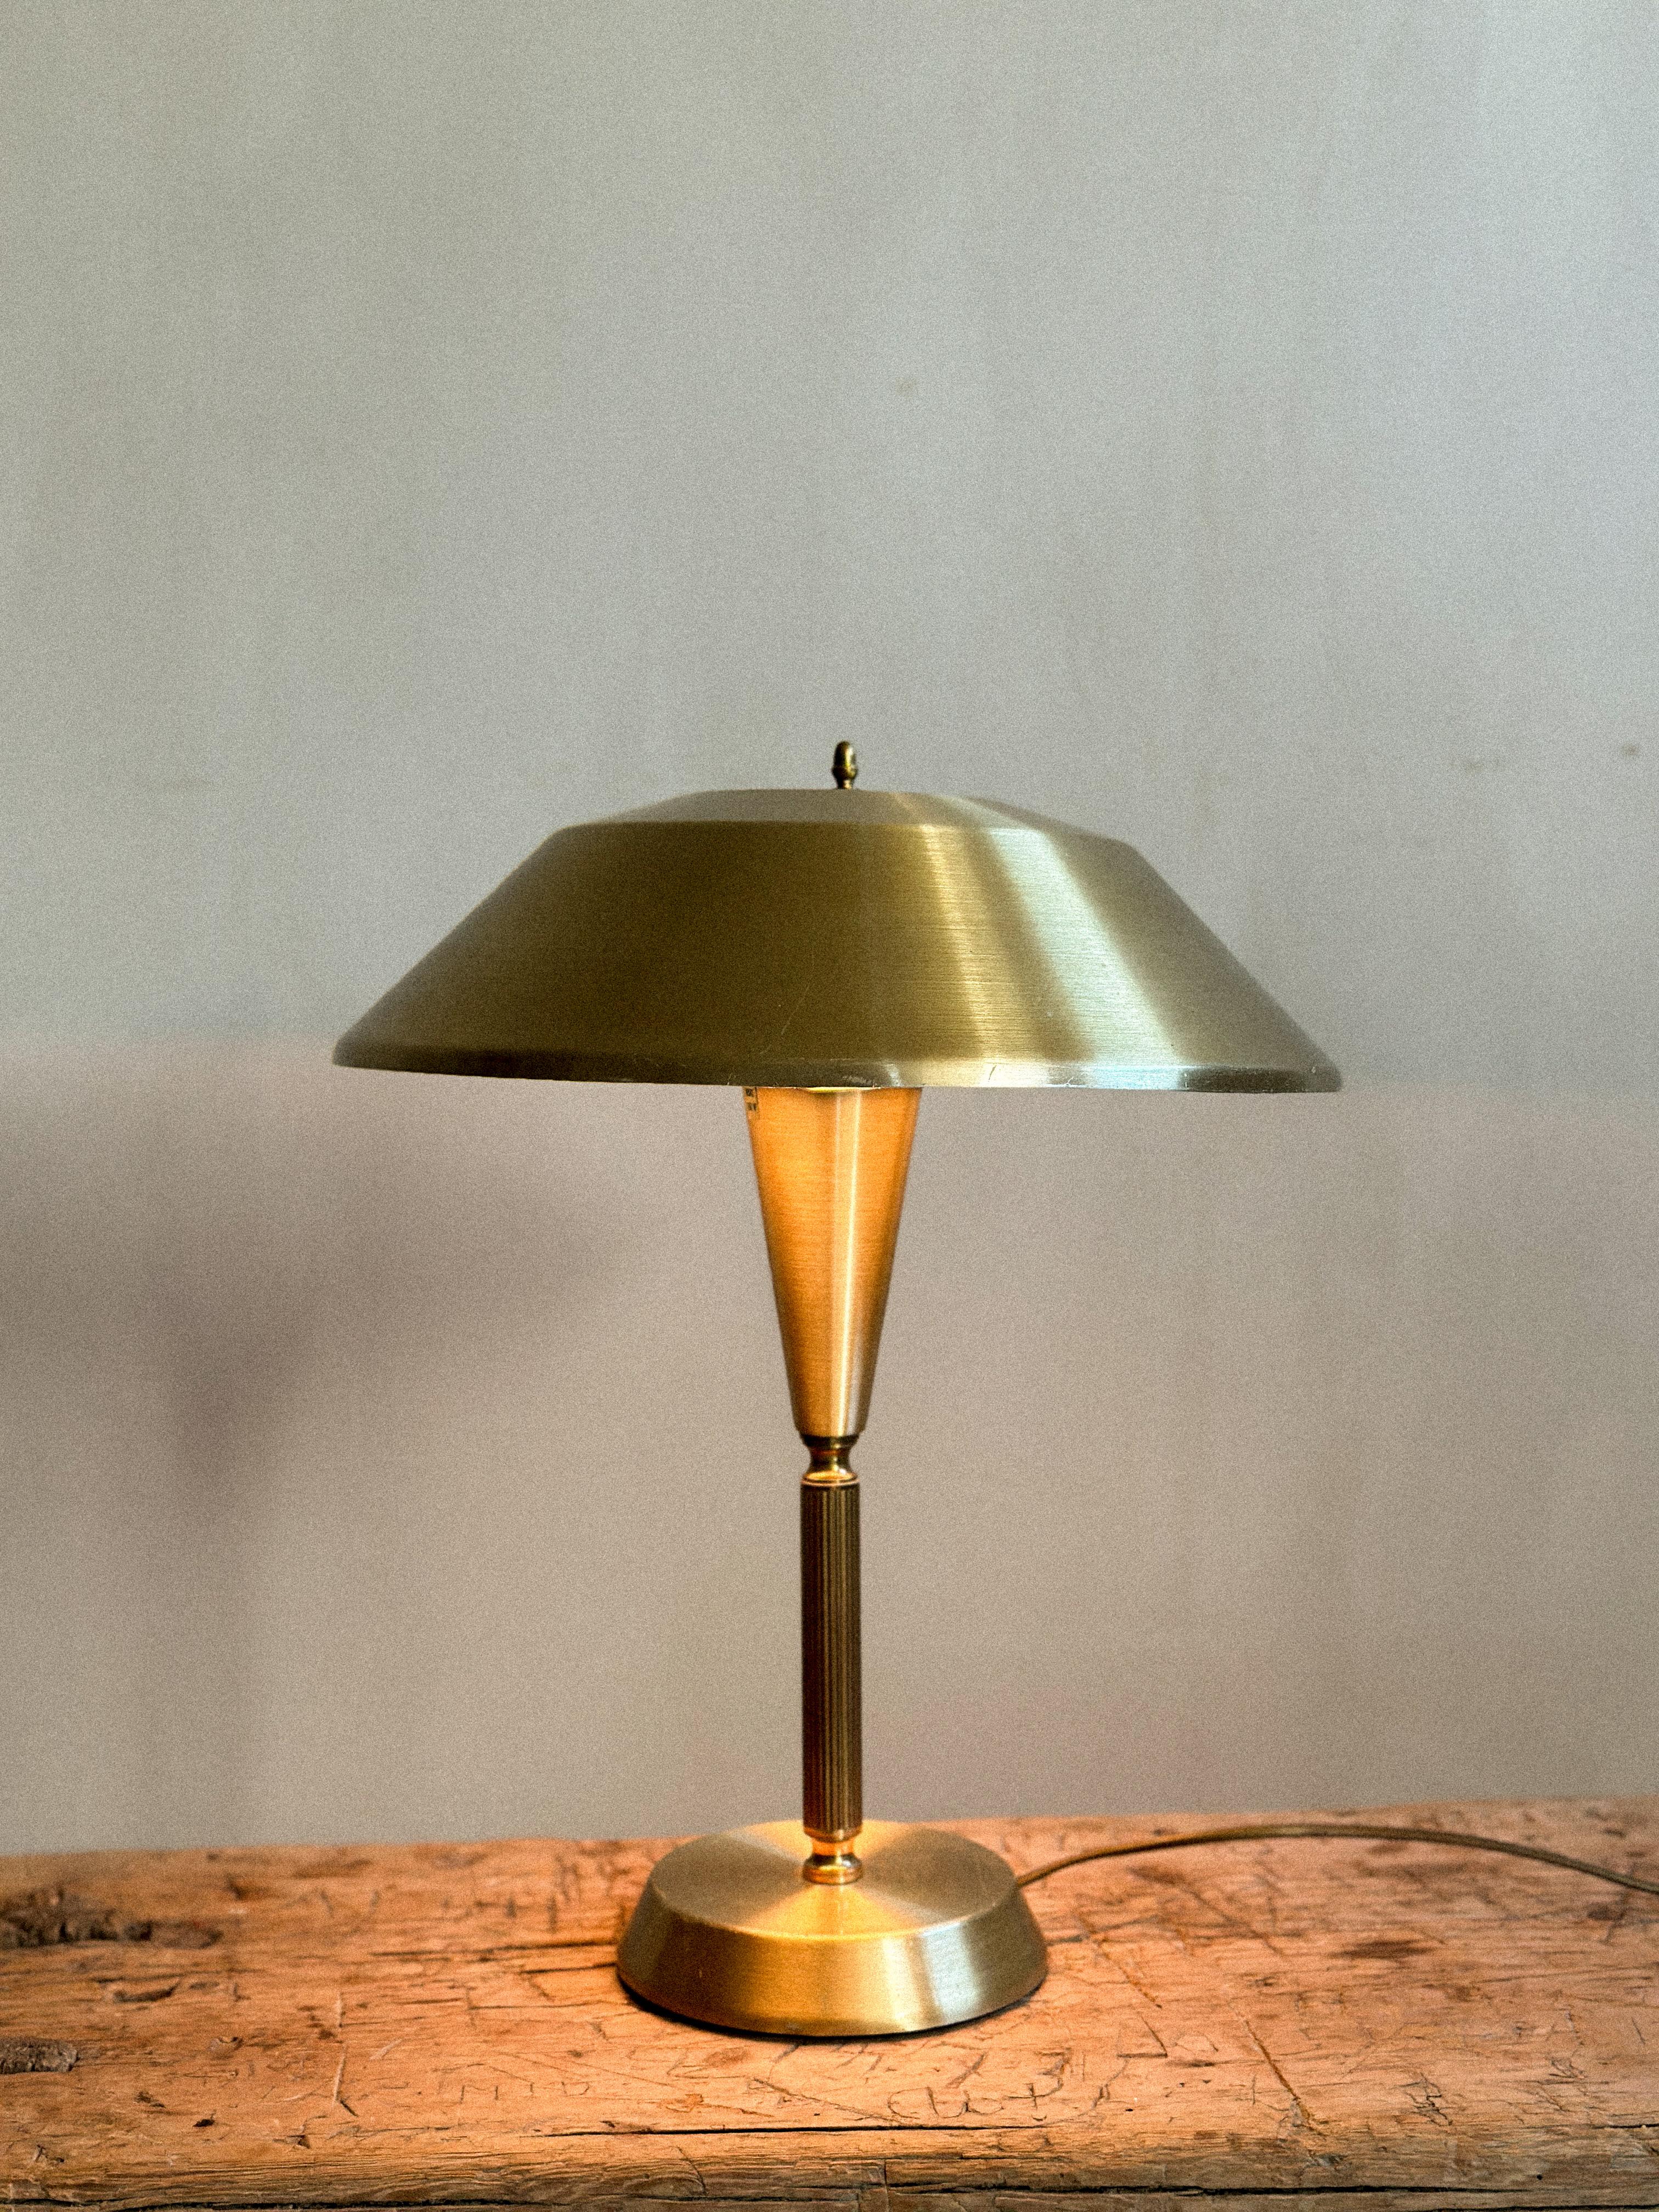 20th Century Mid-Century Scandinavian Table Lamp in Brass, 1960s For Sale